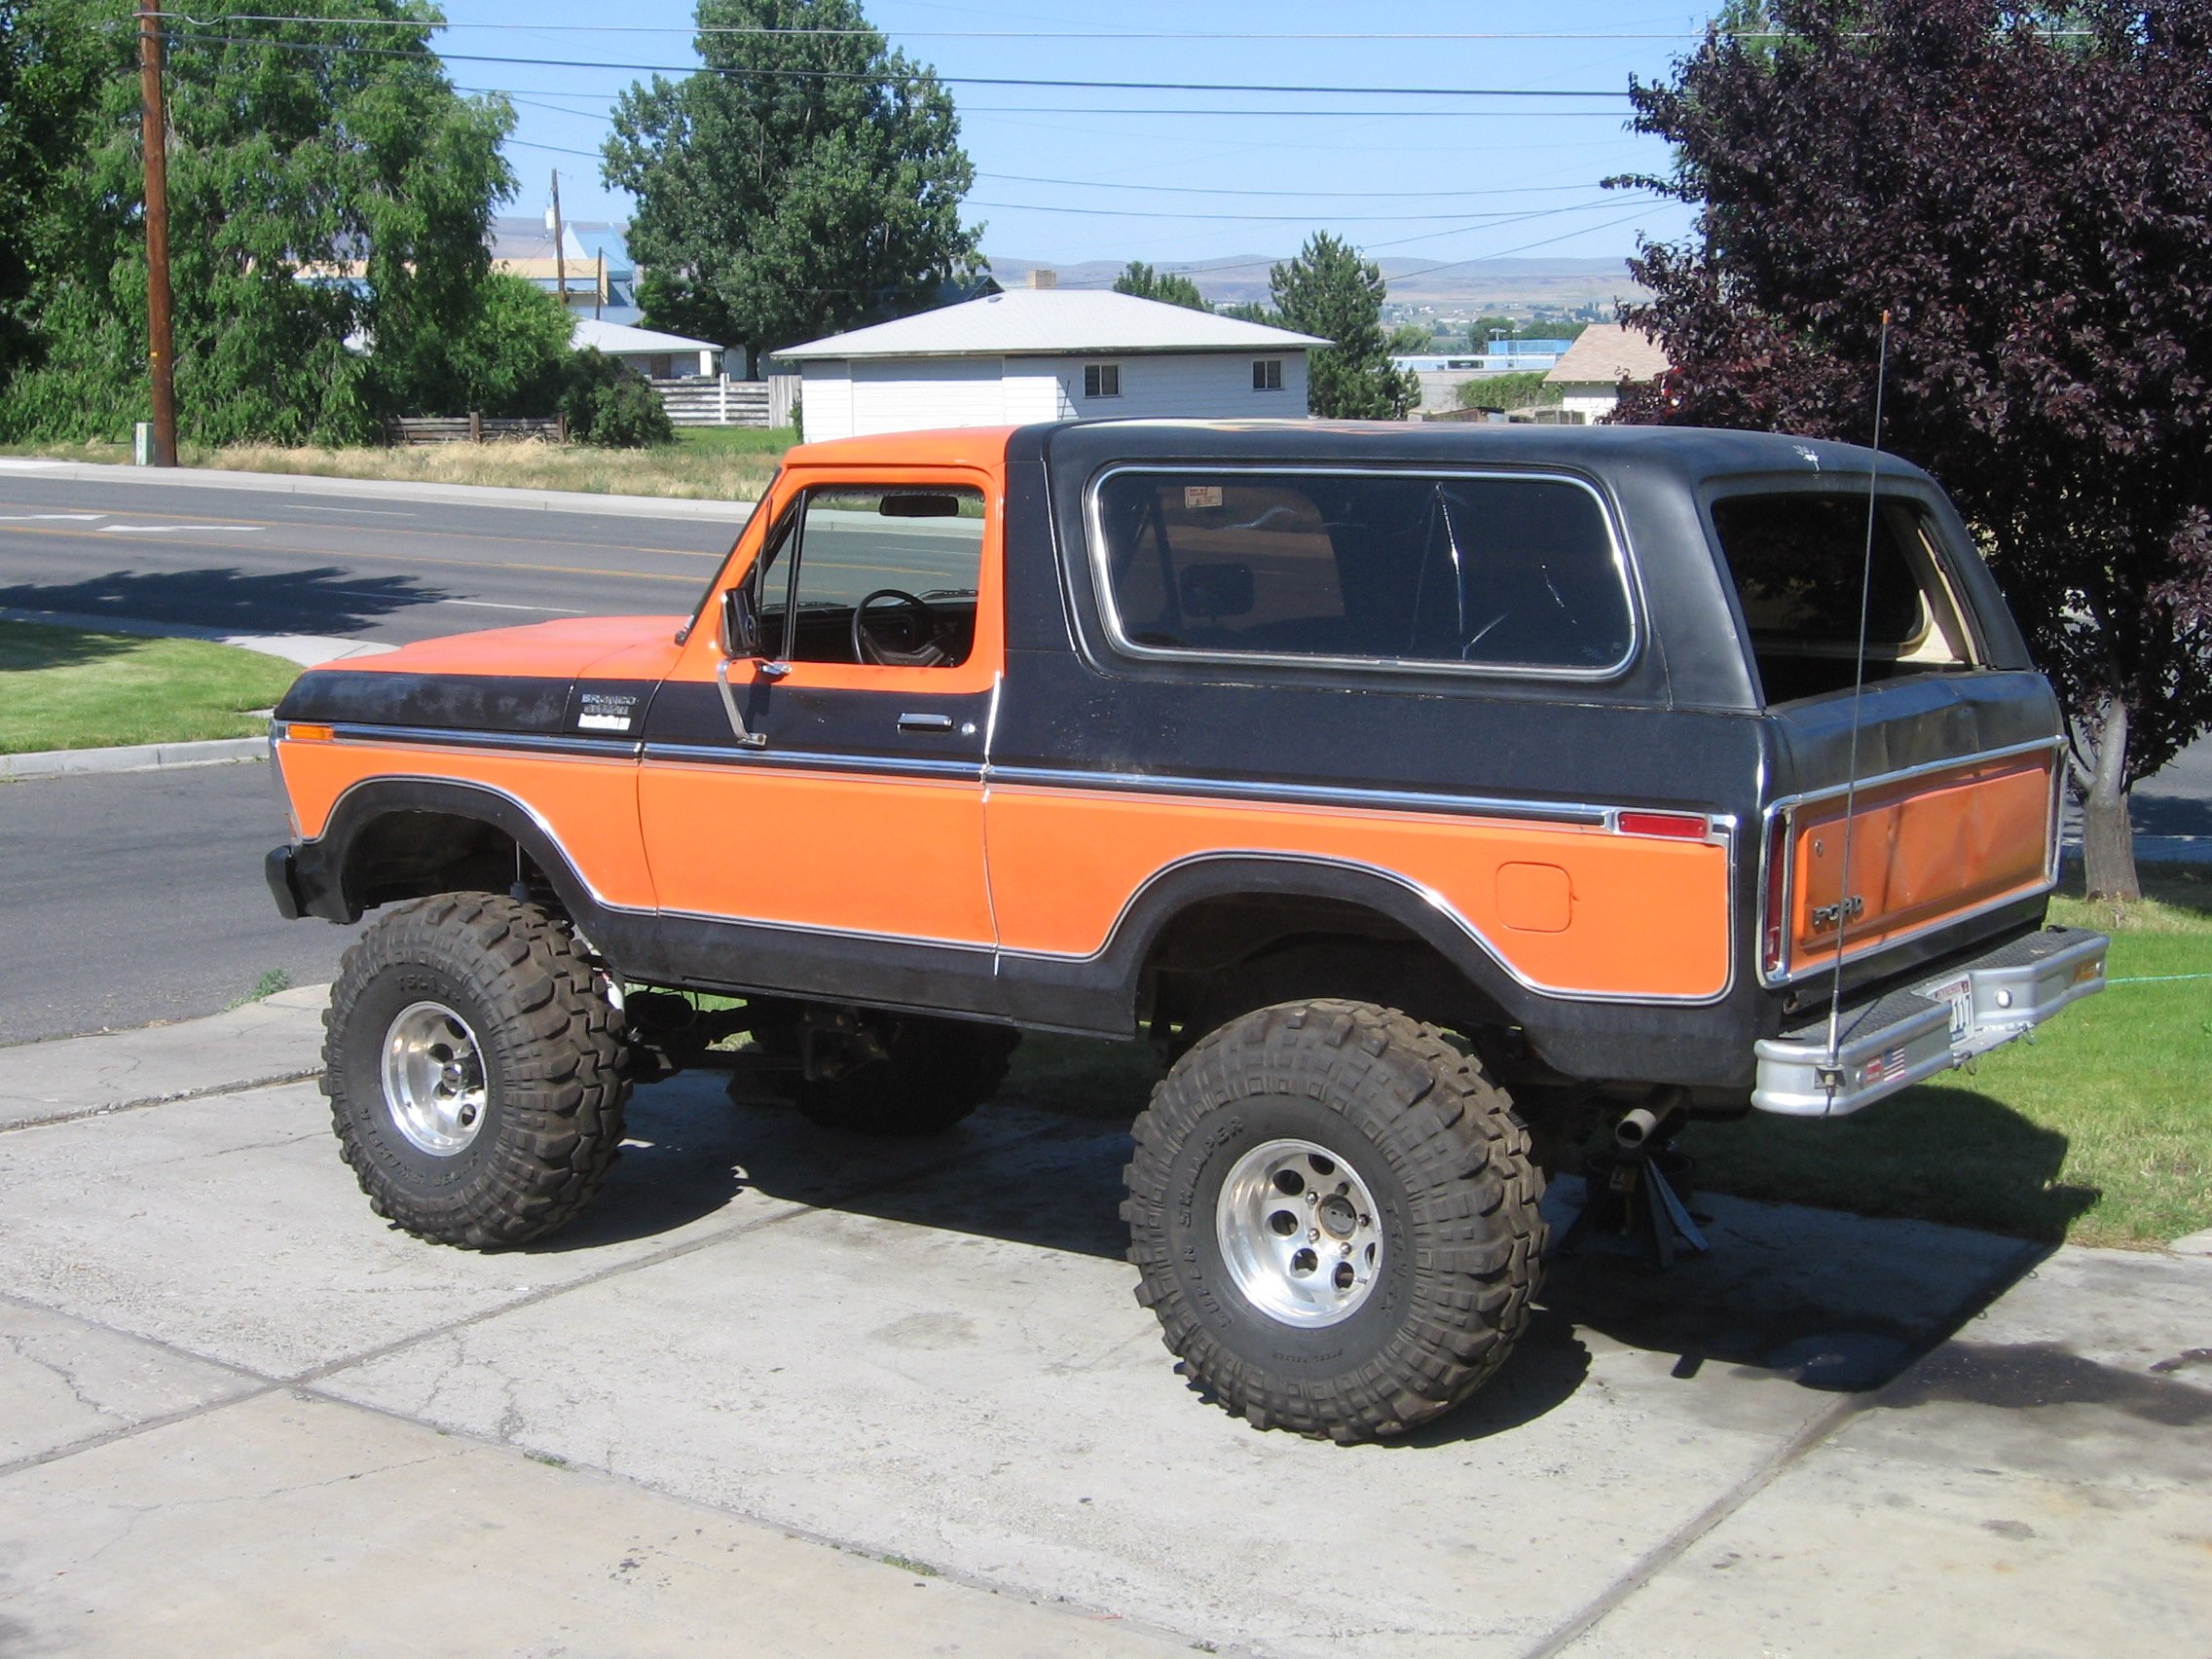 Ford Bronco Suv Truck Wallpaper Background